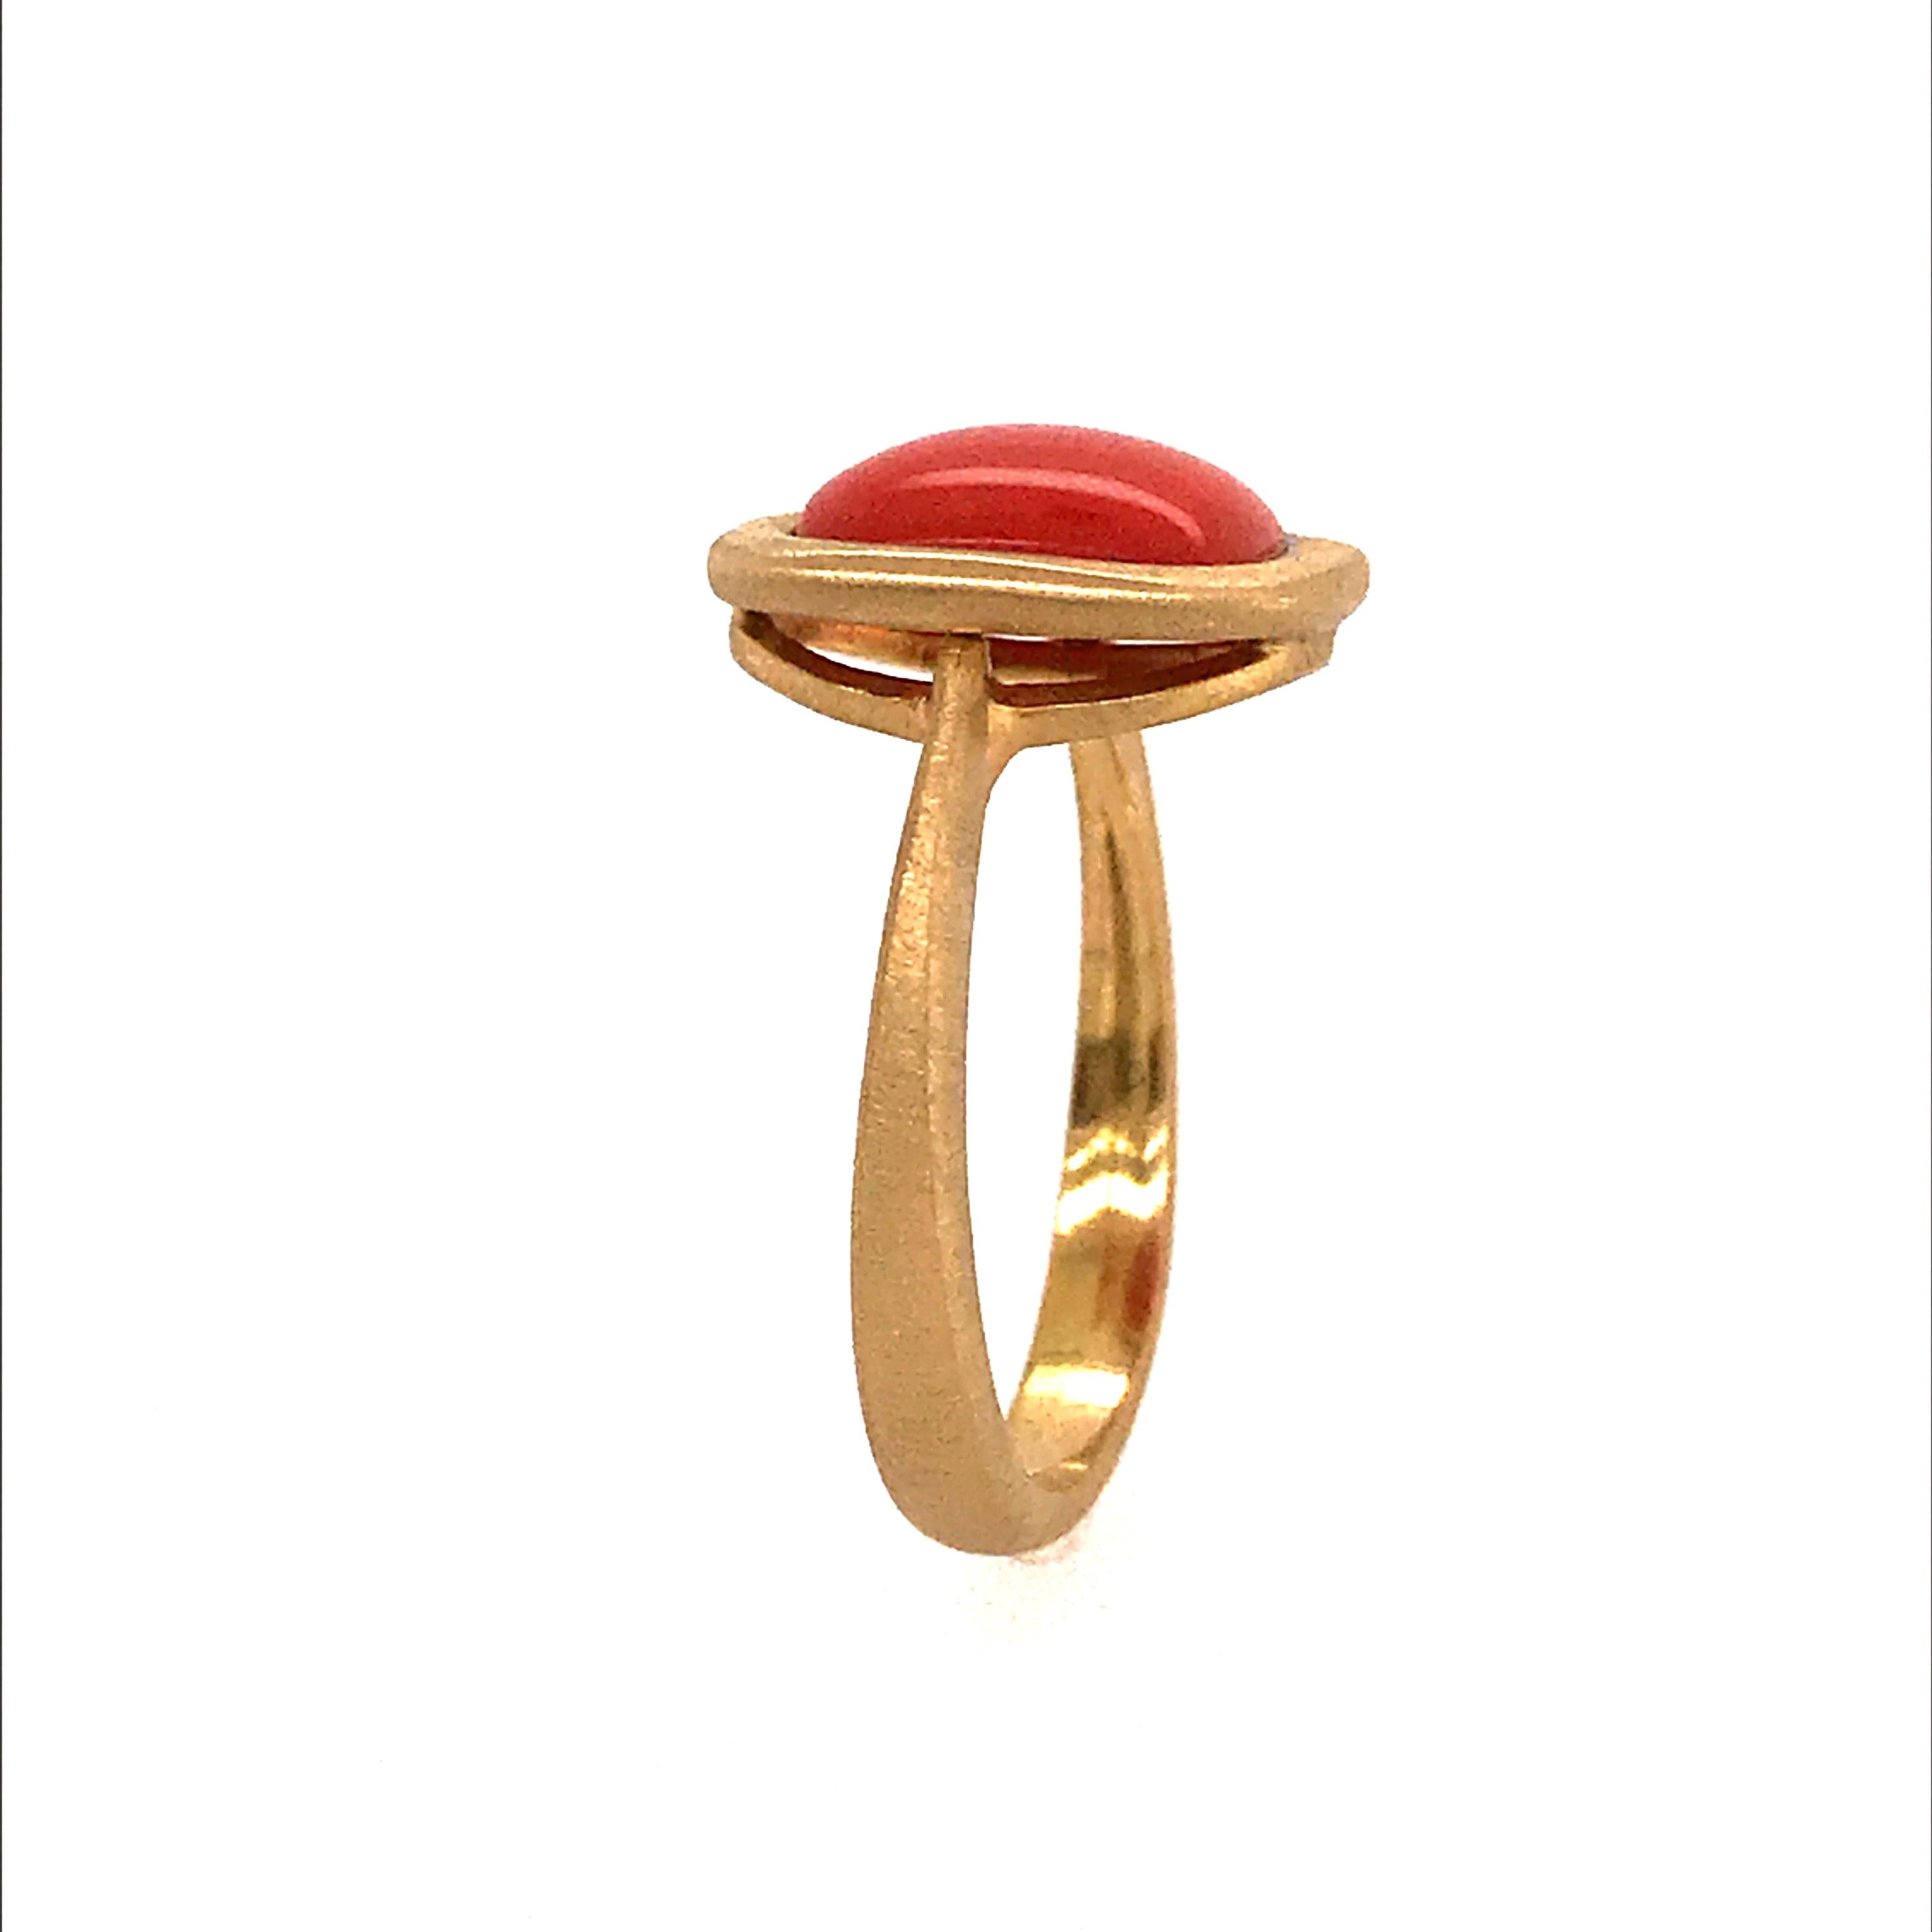 Yellow Gold ring Coral Cabochon
Coral size height 1 cm width 1 cm
ring very easy to put on and live all day without thinking about it .
i particularly like this model of rings ,easy and modern.
Yellow Gold 18 K weigh 4 g
Size of ring French 54.US 7